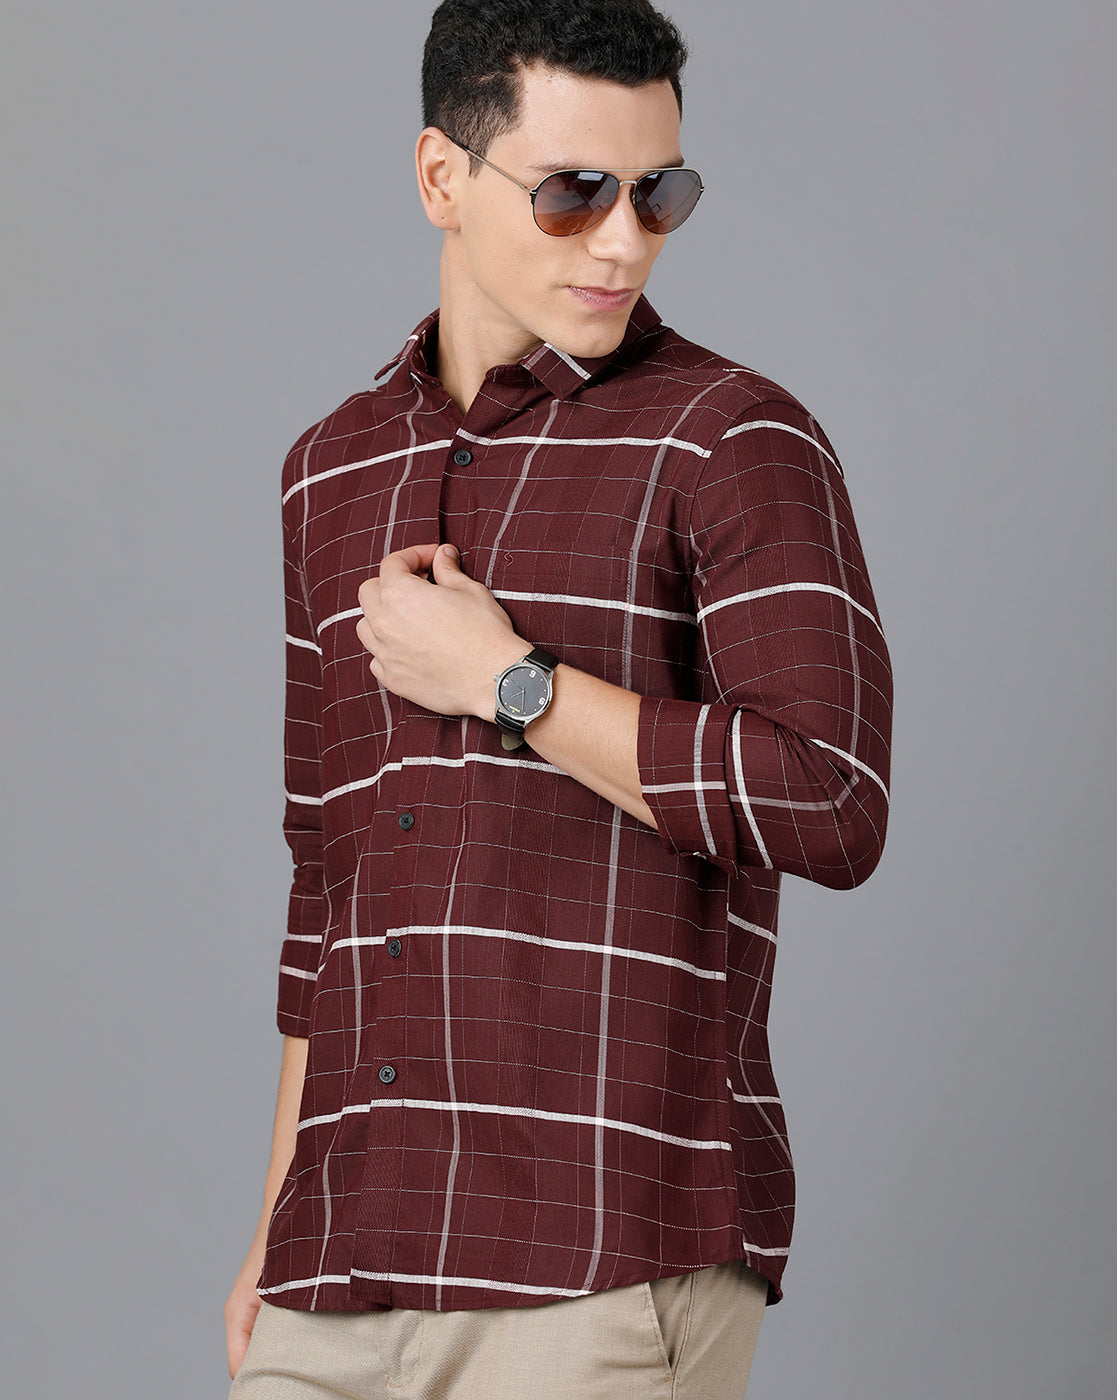 Classic Polo Mens Cotton Full Sleeve Checked Slim Fit Maroon Color Spread Collar Woven Shirt | Sn2-117 A